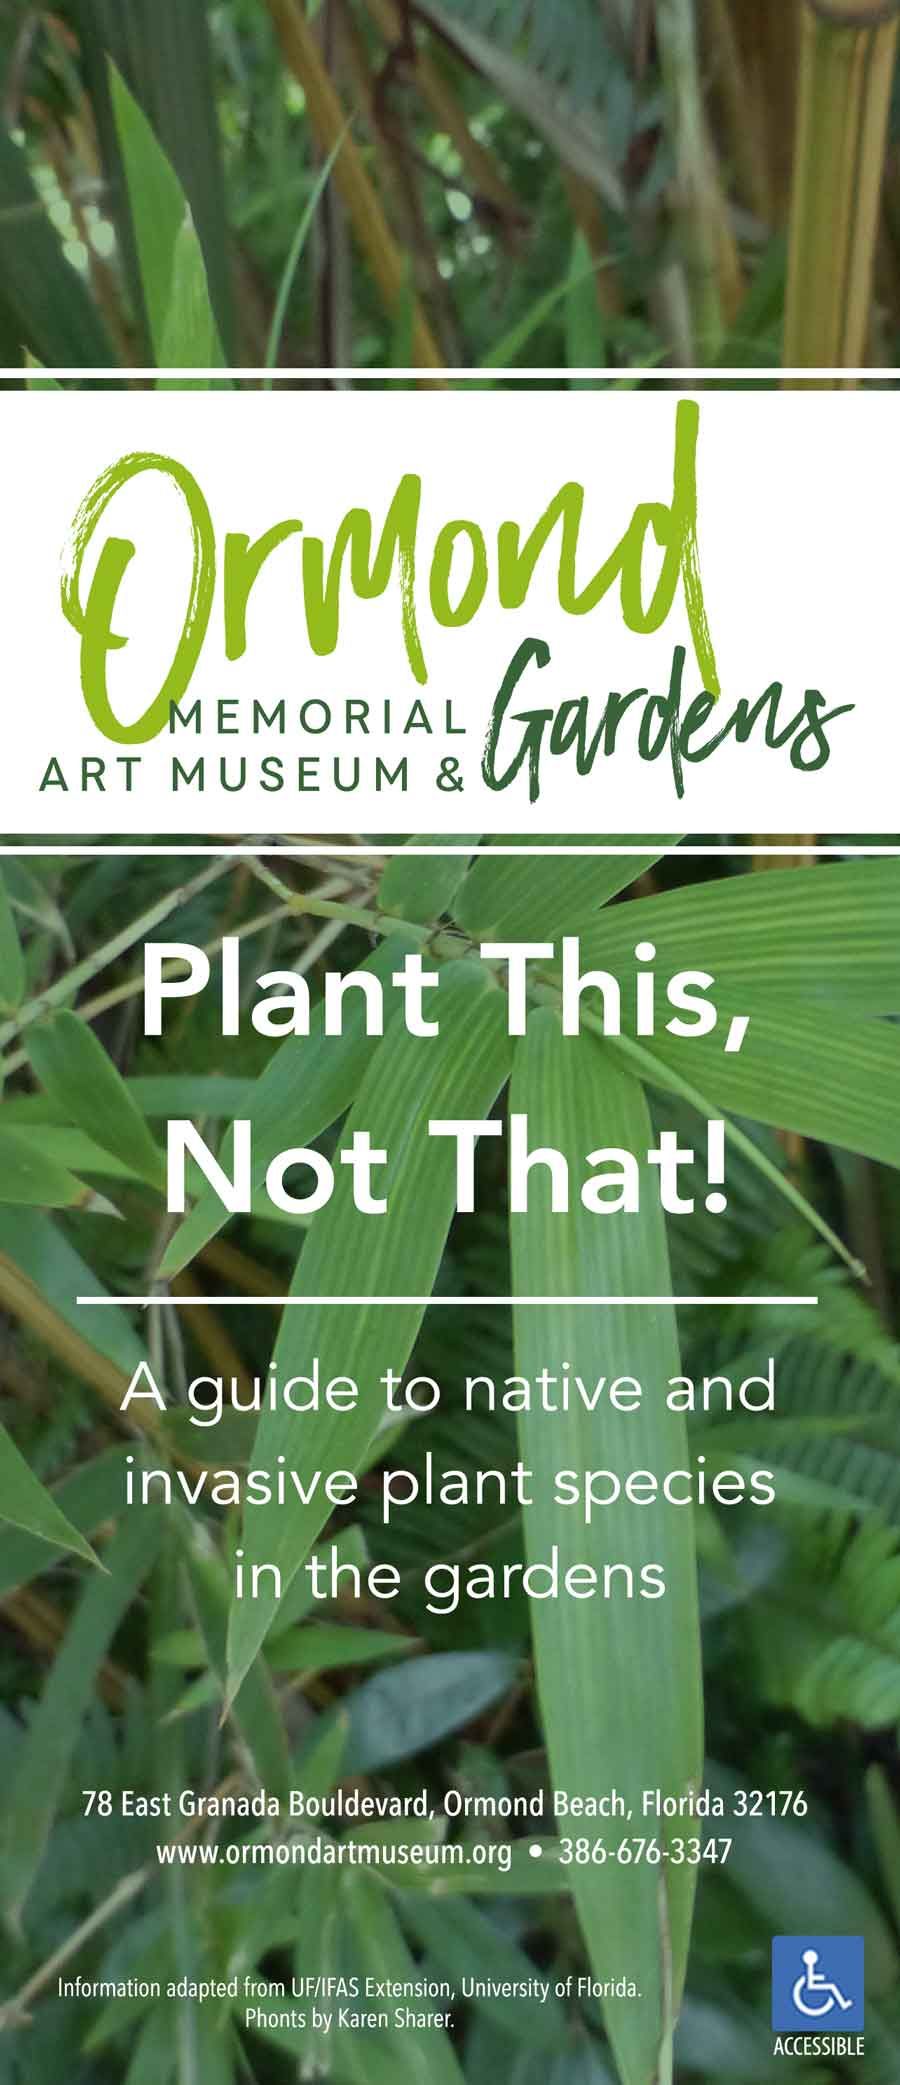 A guide to native and invasive plant species in the gardens